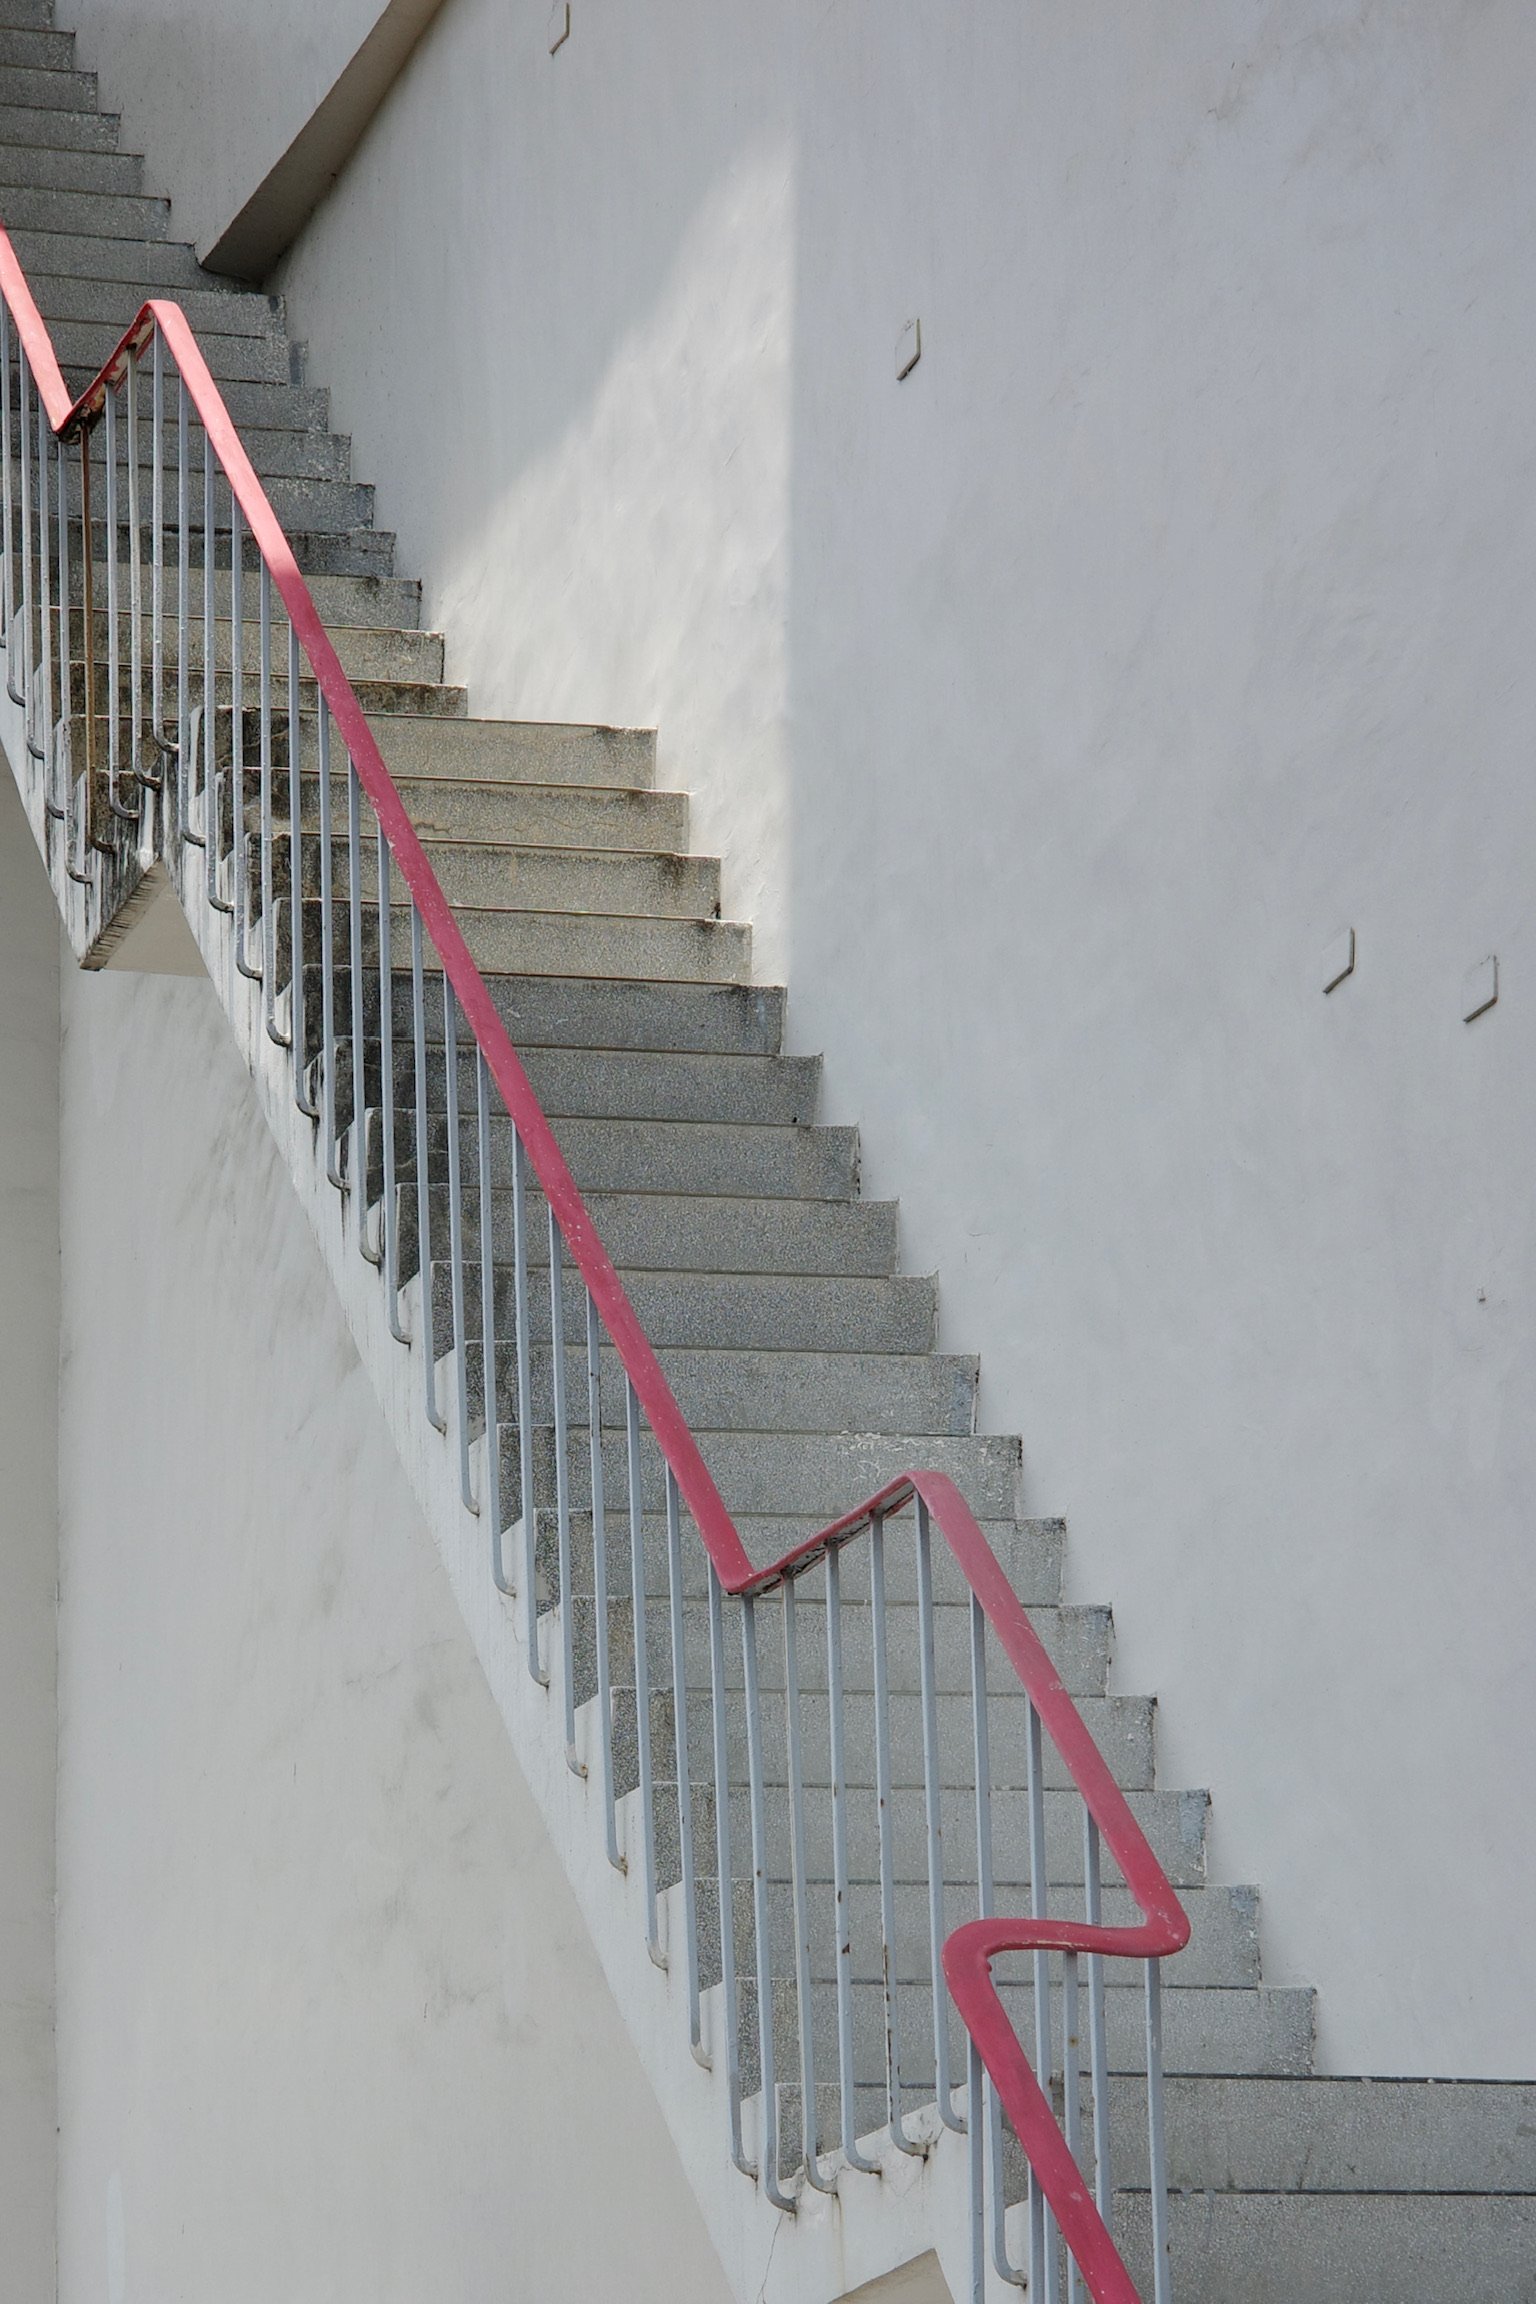 a staircase with red railing with platforms in between.